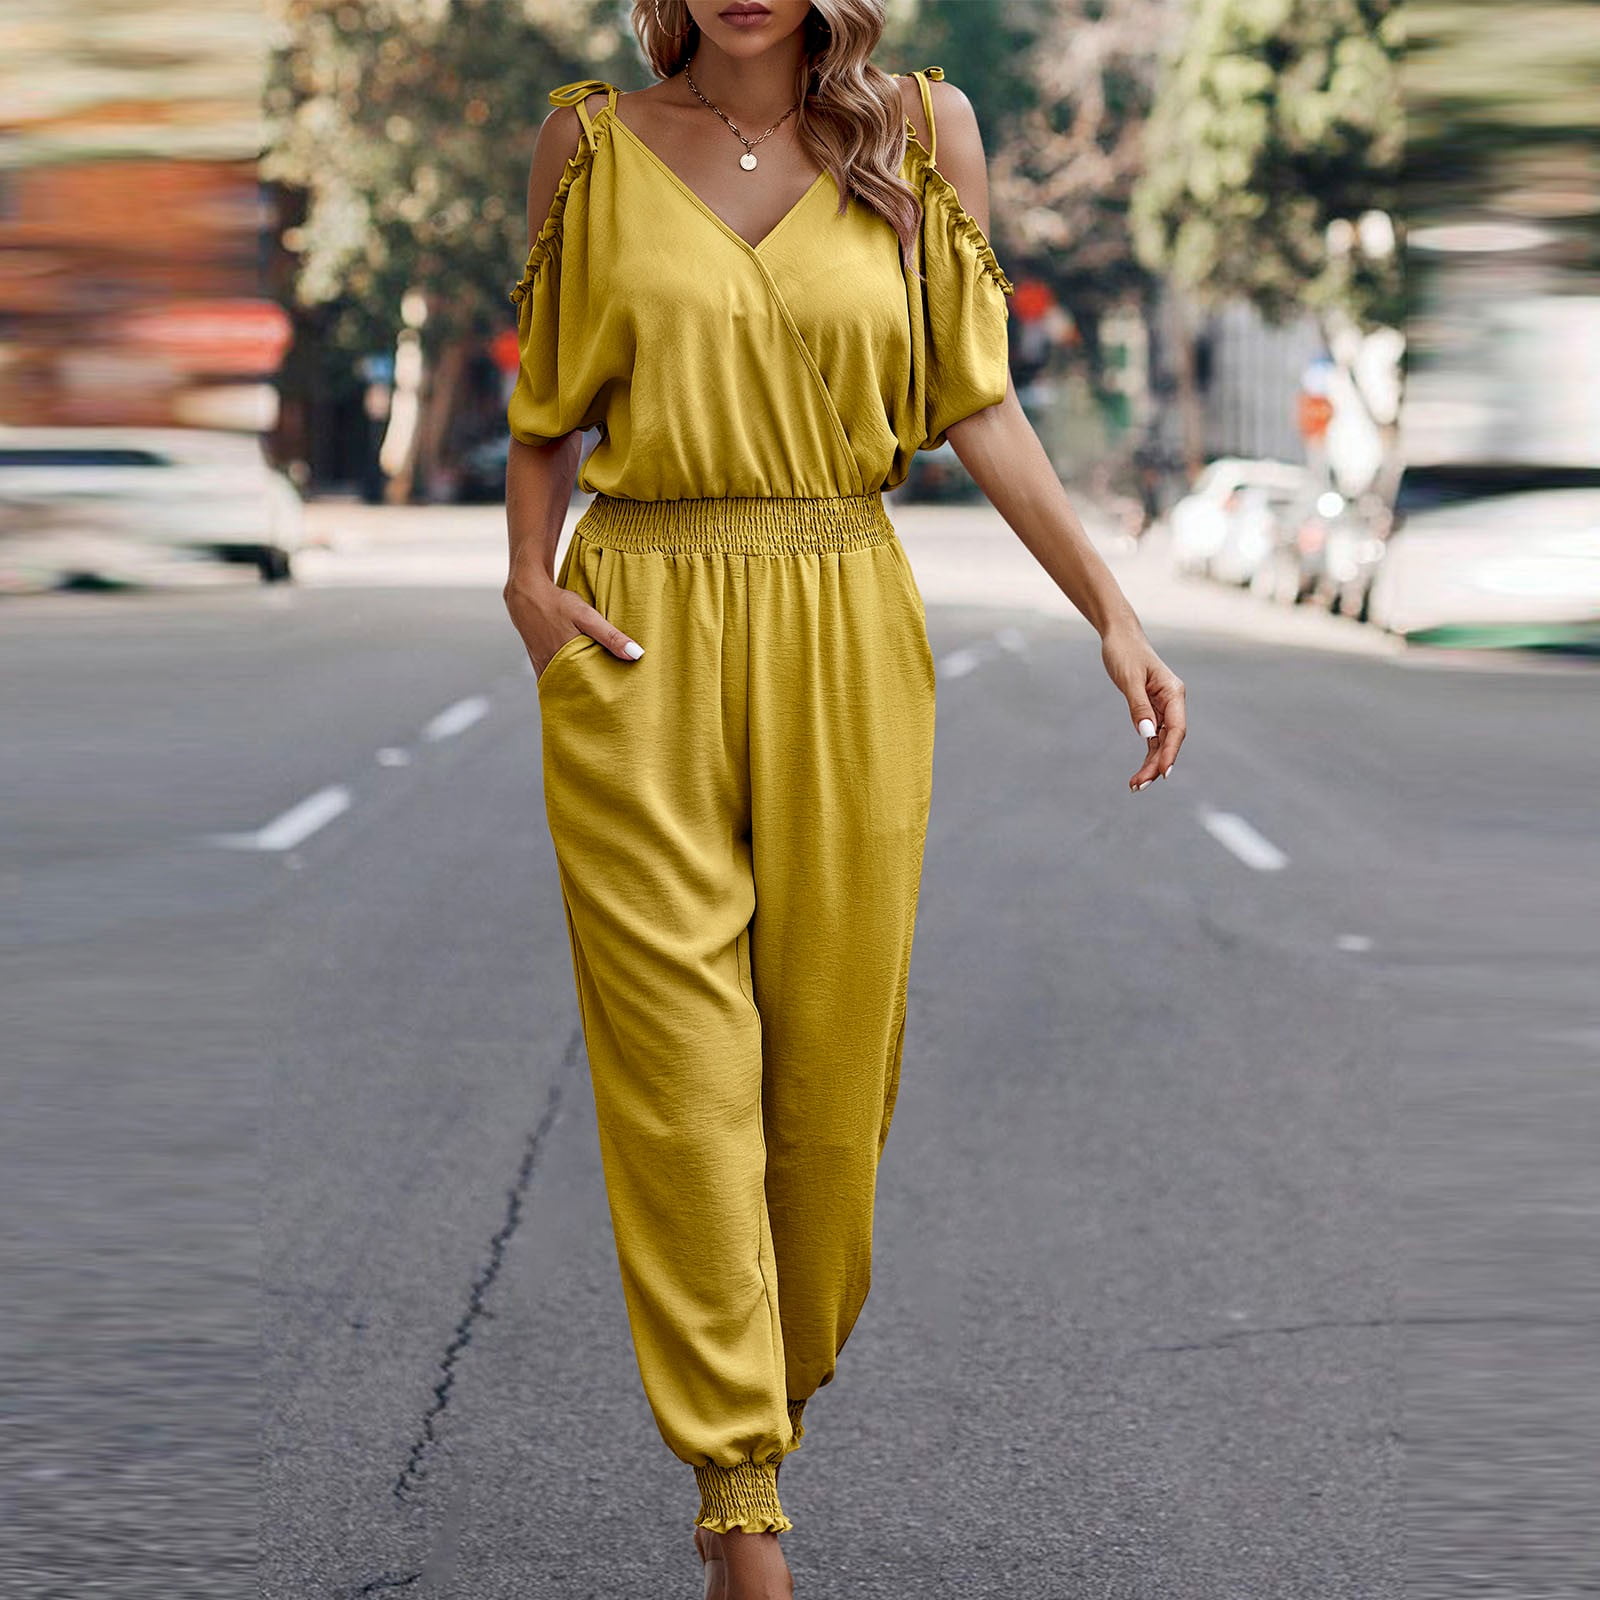 qolati Jumpsuit for Women Casual Loose Spaghetti Strap Tunic Long Pants  Rompers Sexy Ruffle Cold Shoulder Summer One-Piece Overalls 